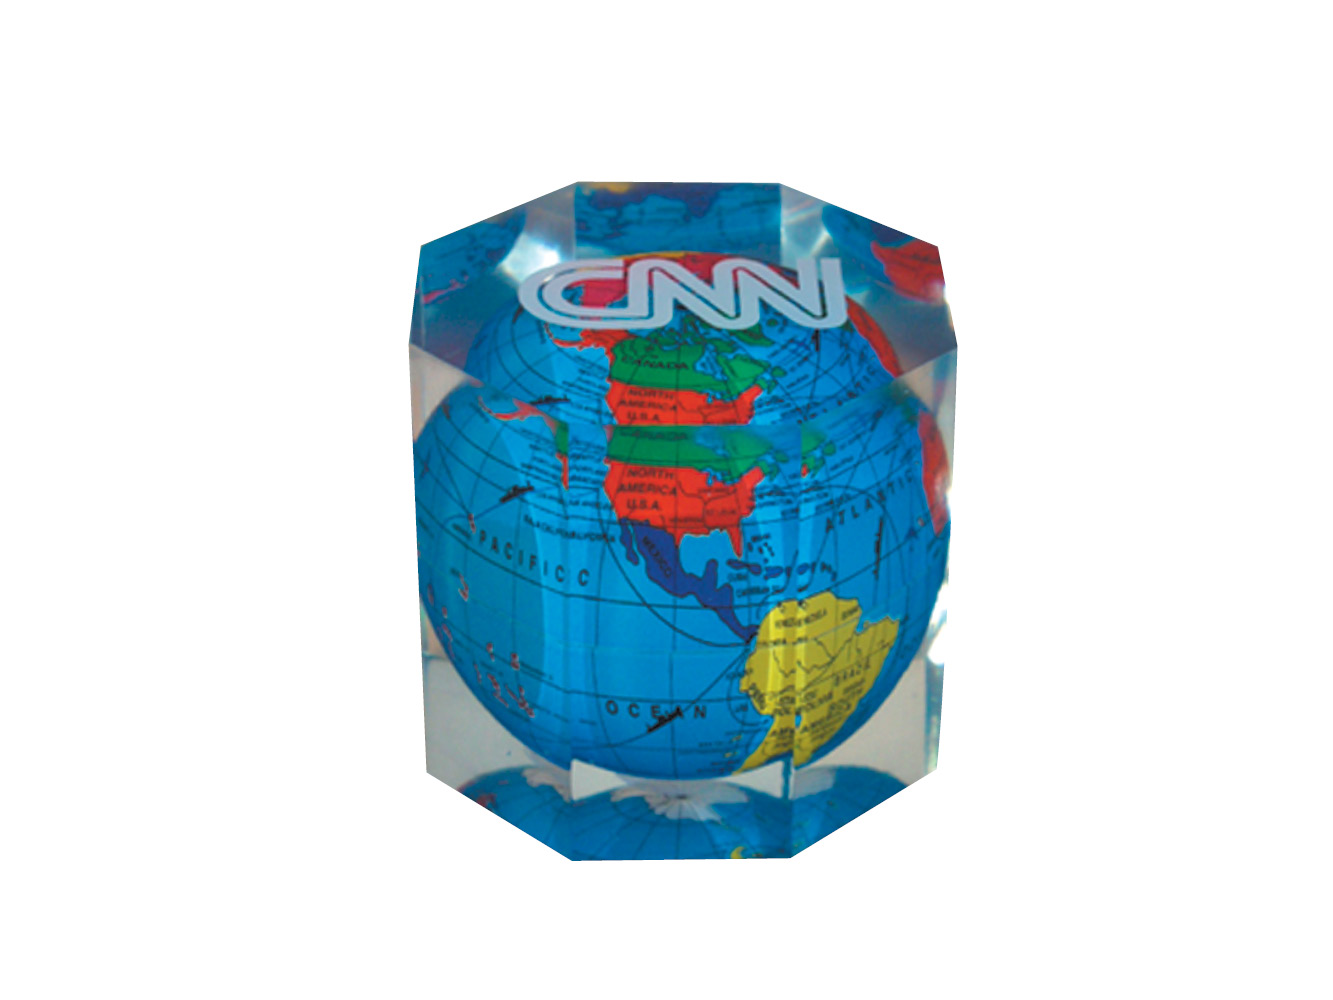 GCW7: Octagon Global Paperweight